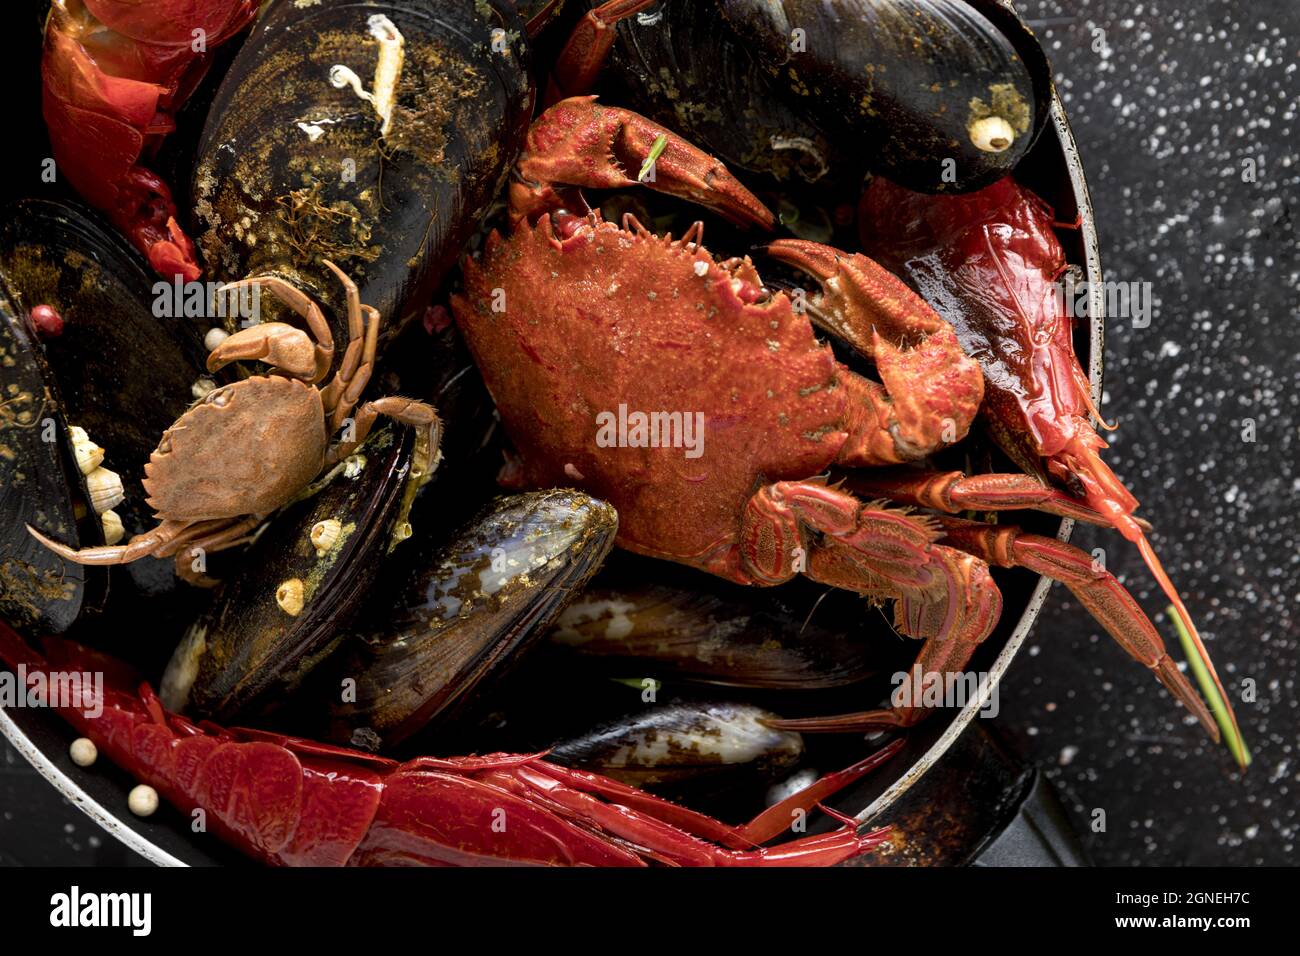 high angle of pan with crab and mussels. High quality and resolution beautiful photo concept Stock Photo